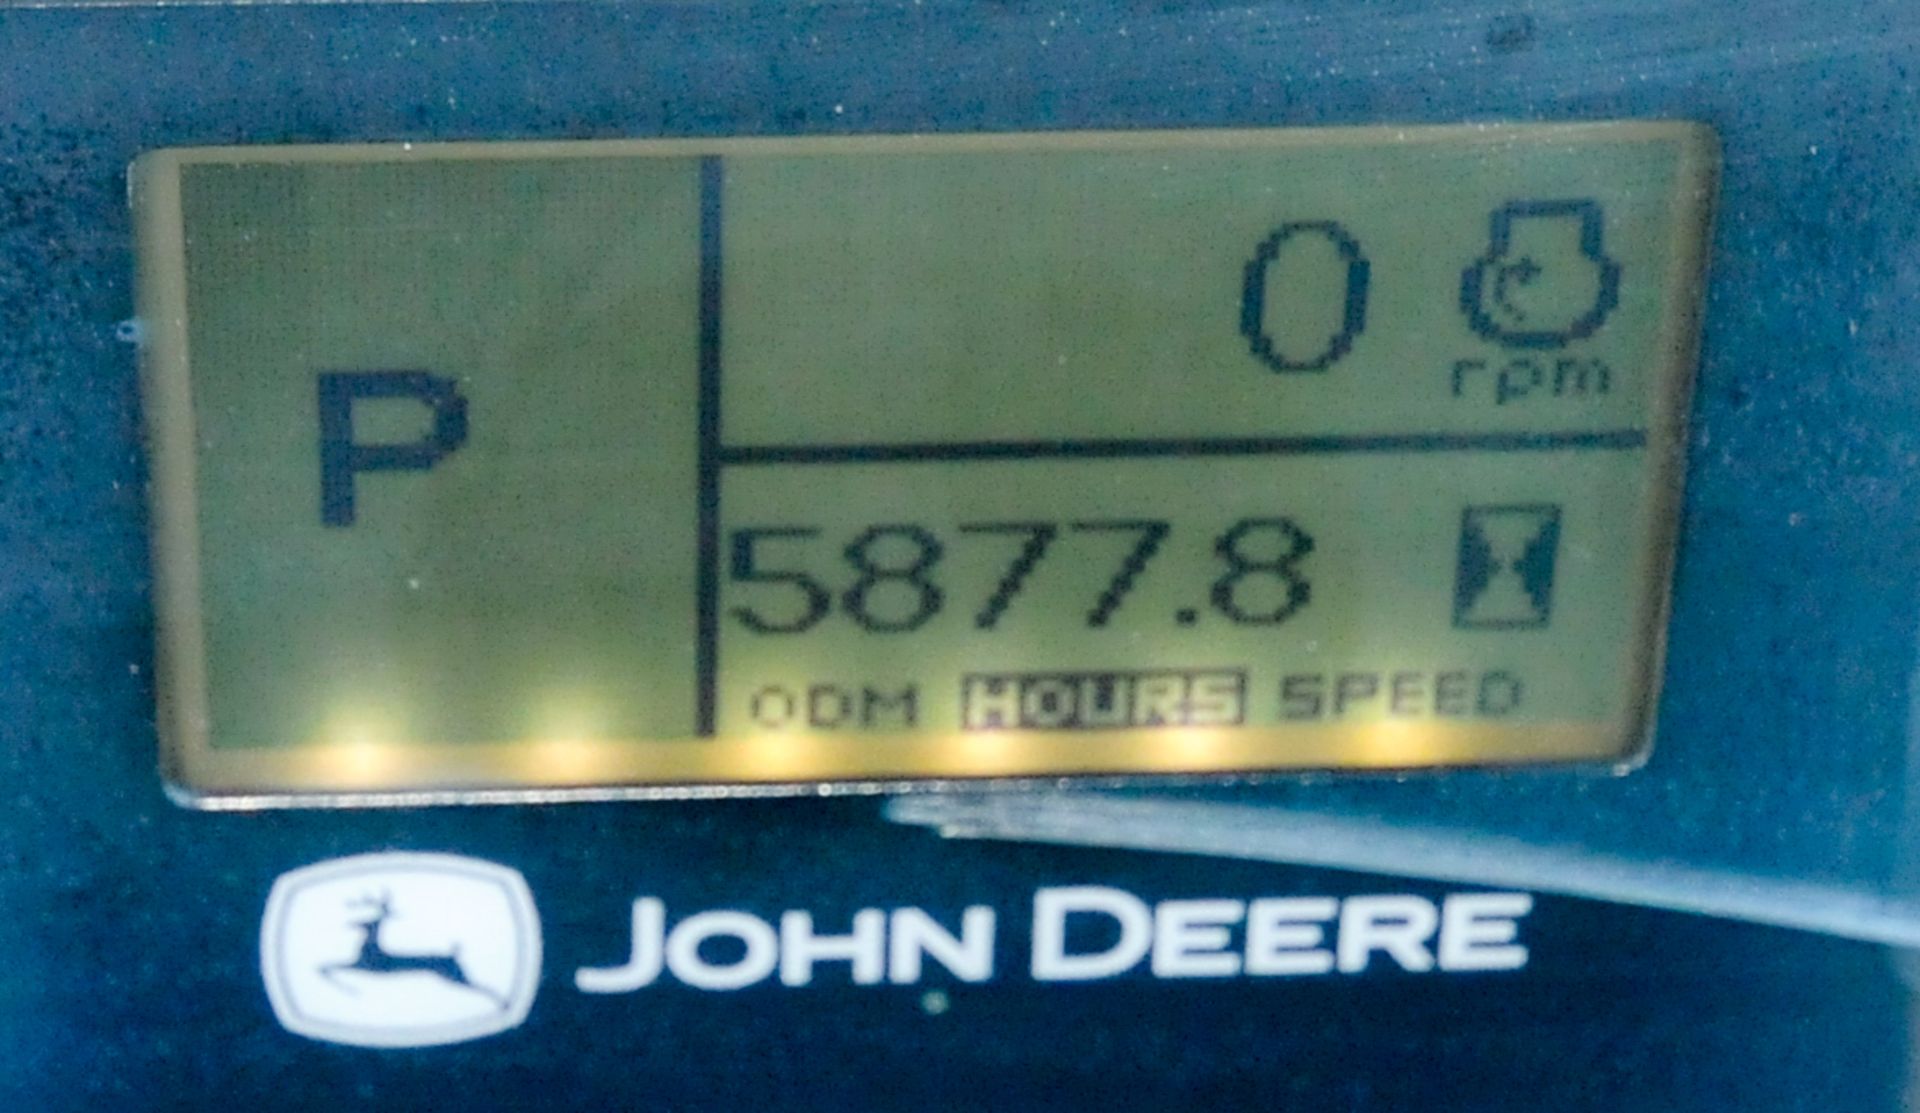 JOHN DEERE (2008) 670D MOTOR GRADER, APPROX. 5,878 HRS RECORDED ON METER AT THE TIME OF LISTING, - Image 11 of 12